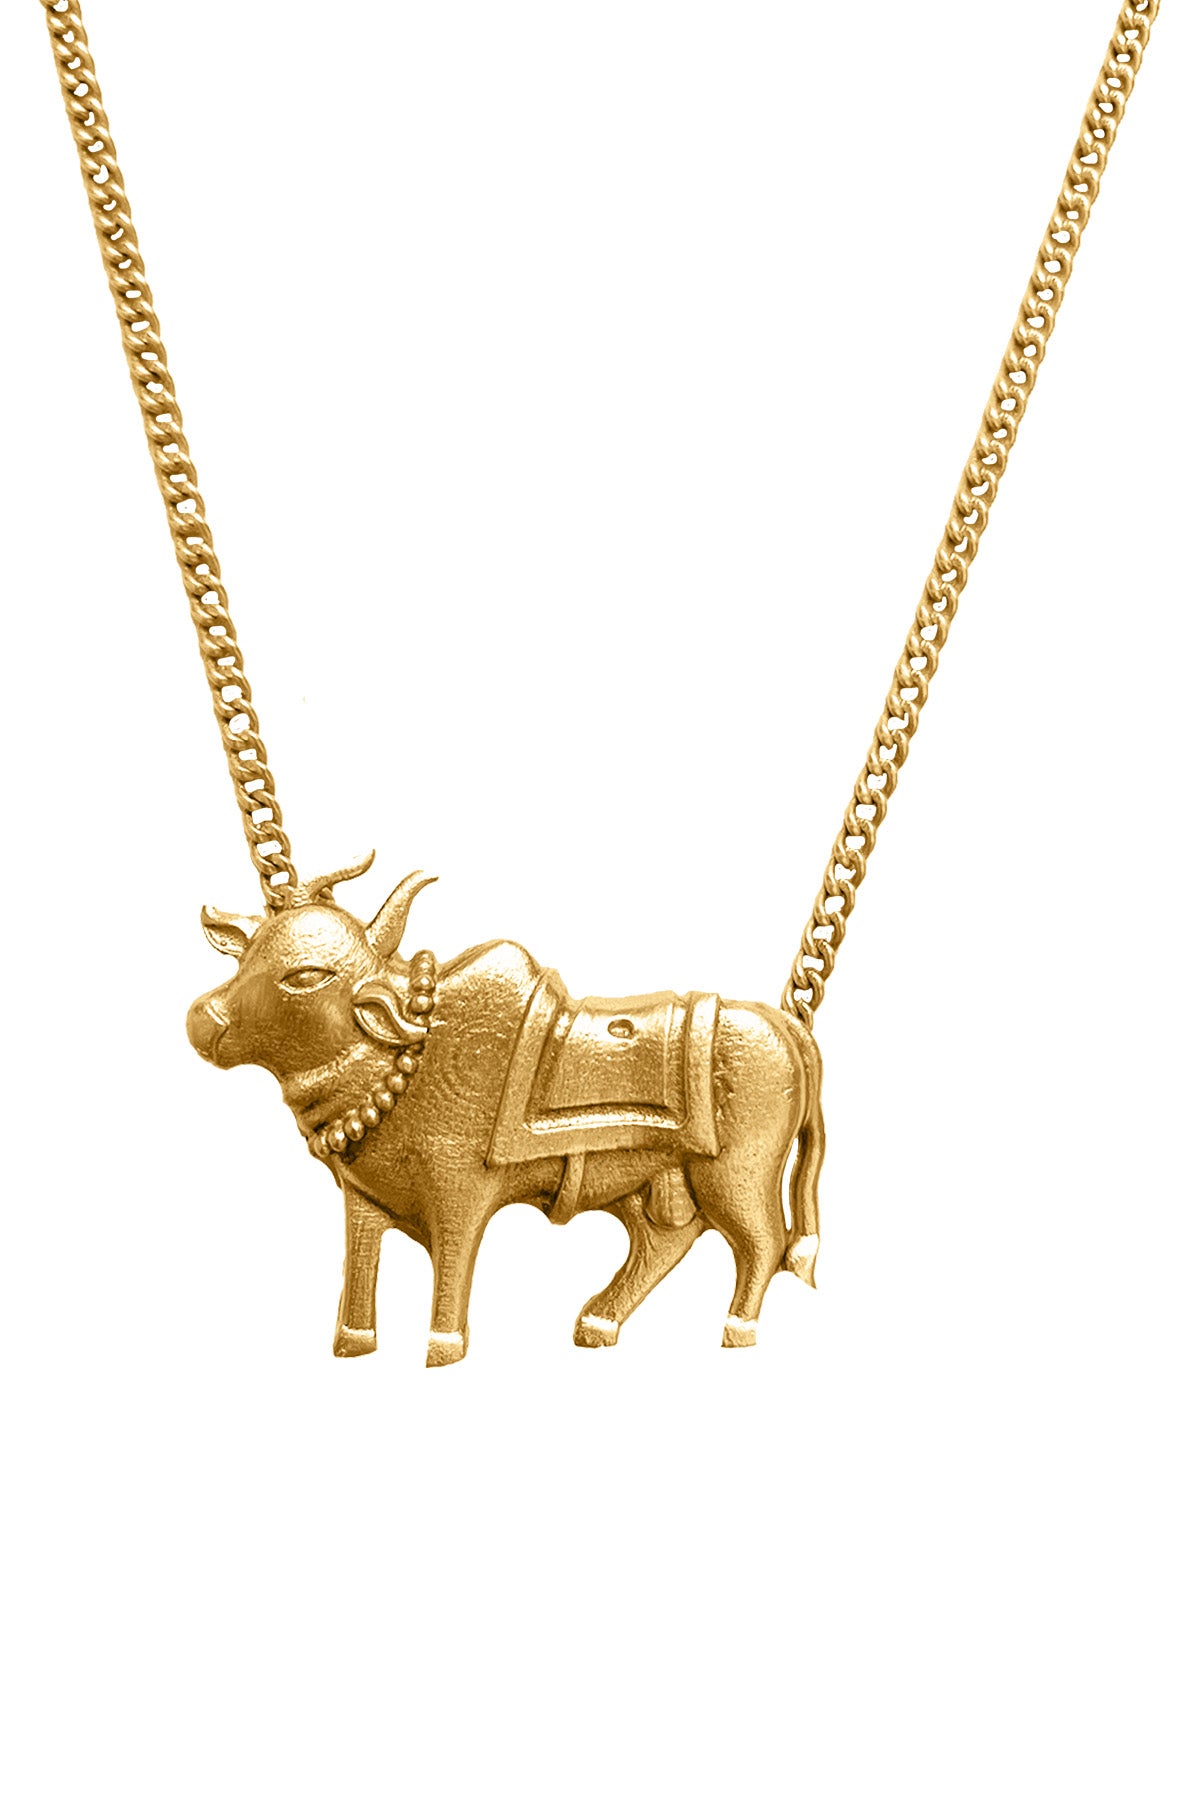 Gold Prize Bull Necklace for her made in Solid 14kt Gold | AgriJewelry –  Chris Chaney